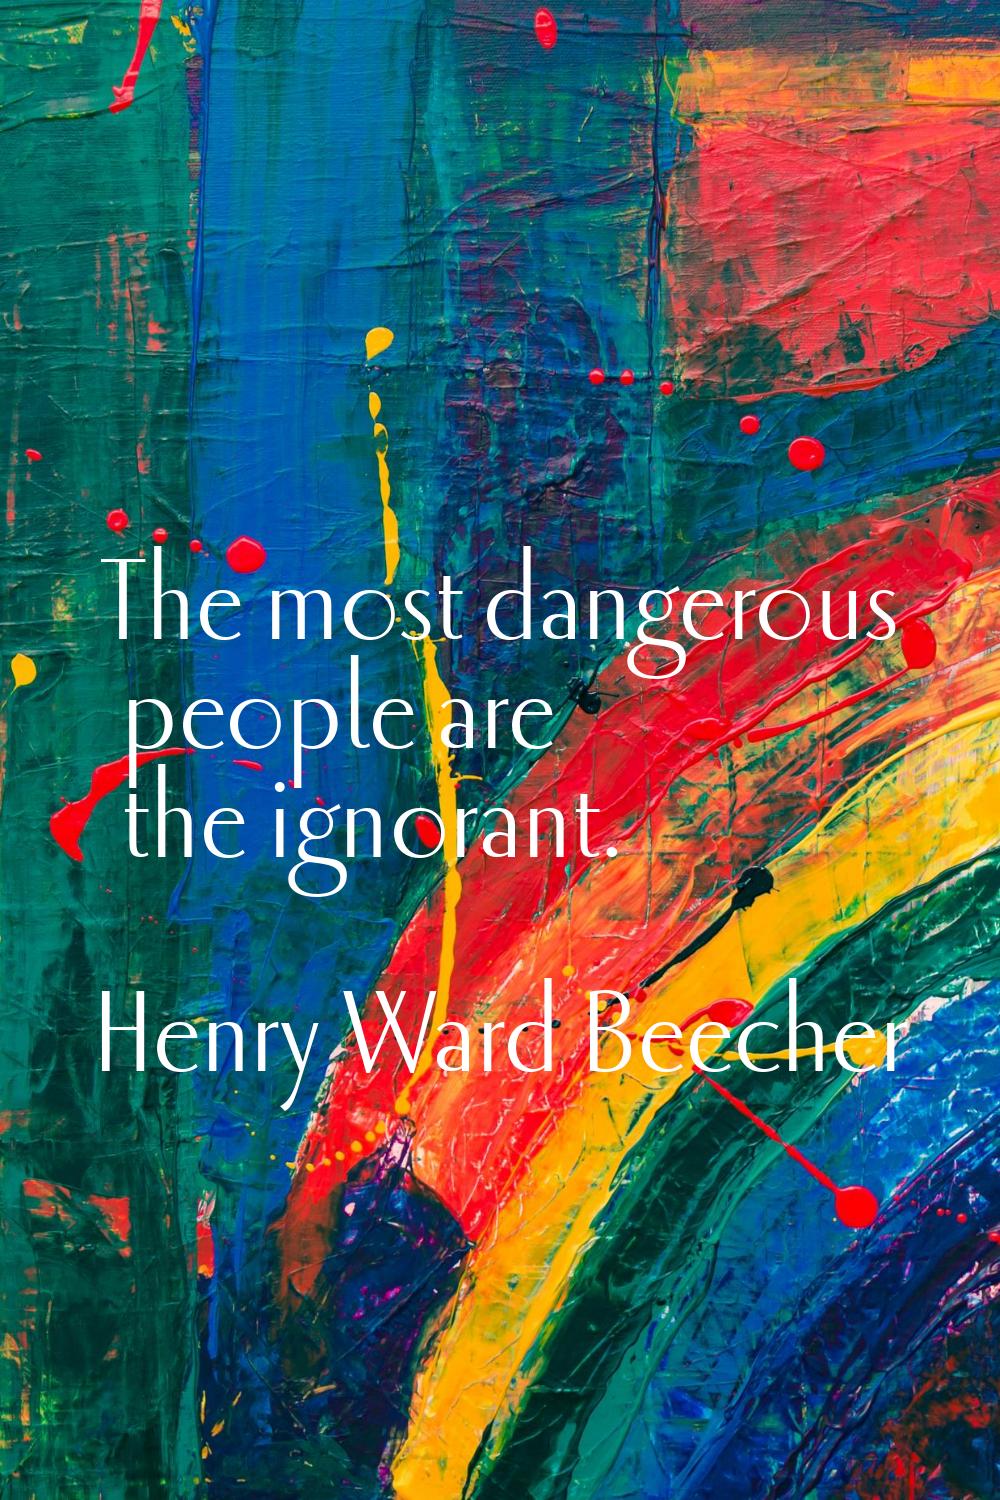 The most dangerous people are the ignorant.